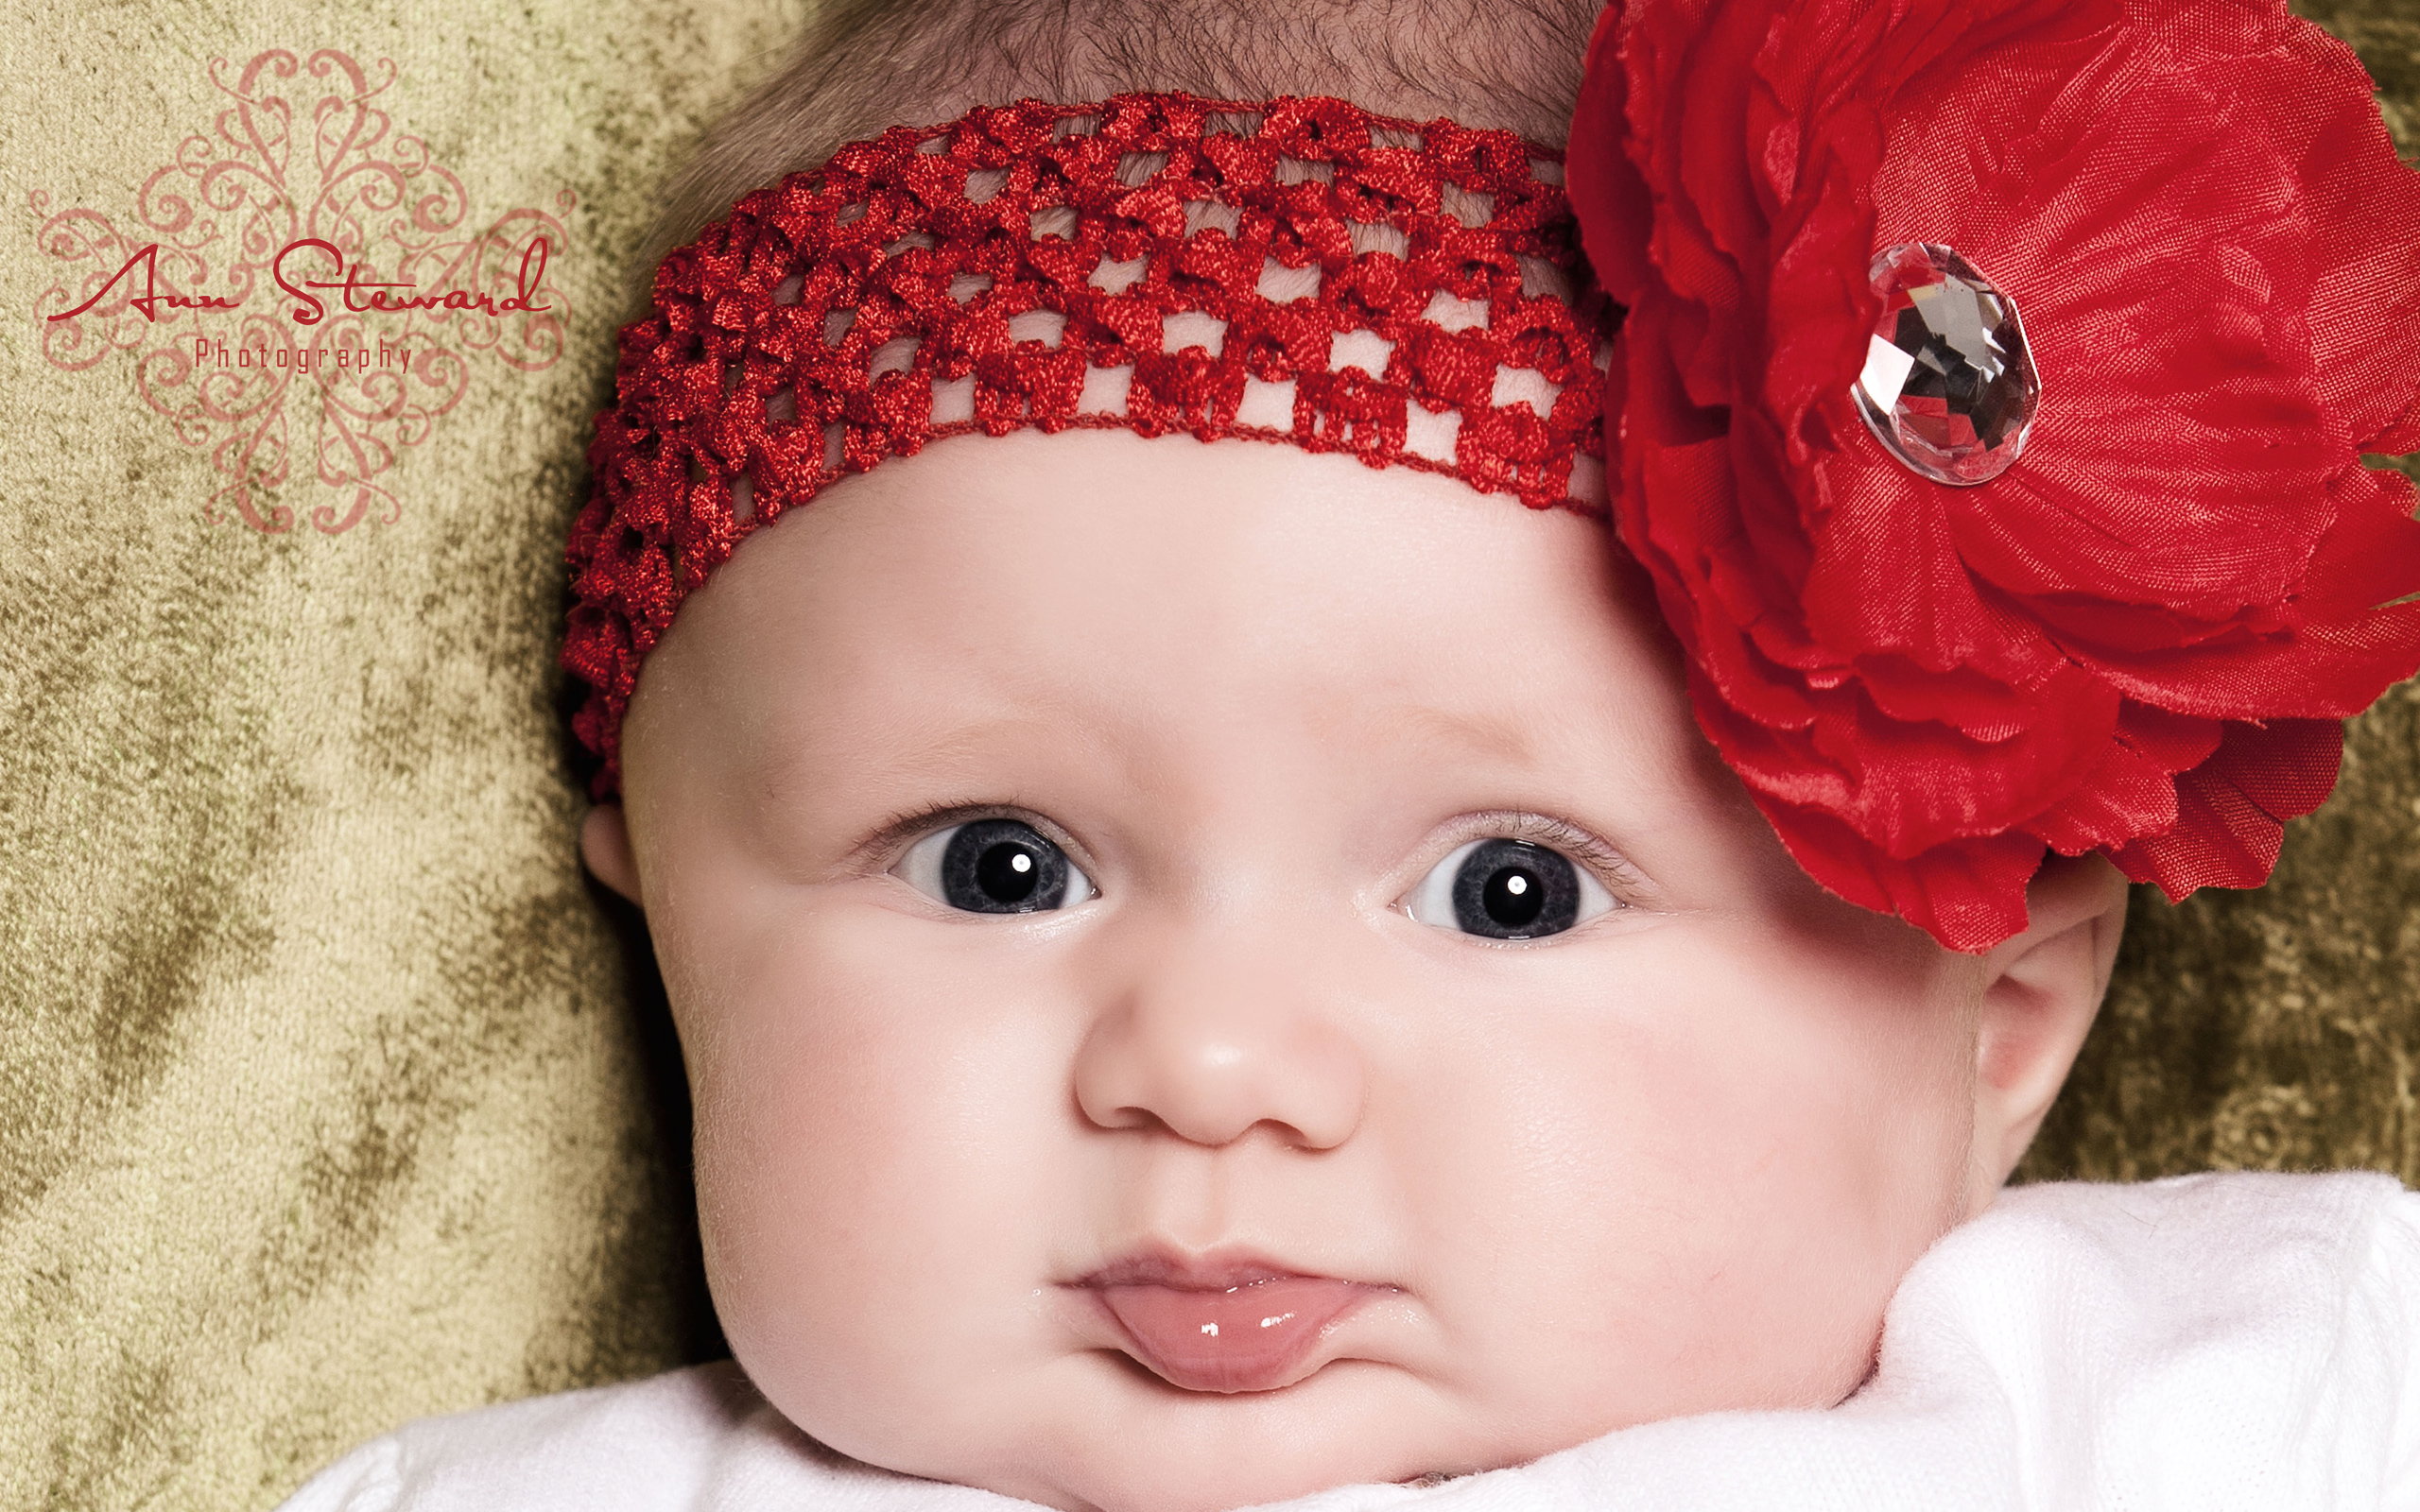 Super Cute Little Baby Wallpapers HD Wallpapers 2560x1600